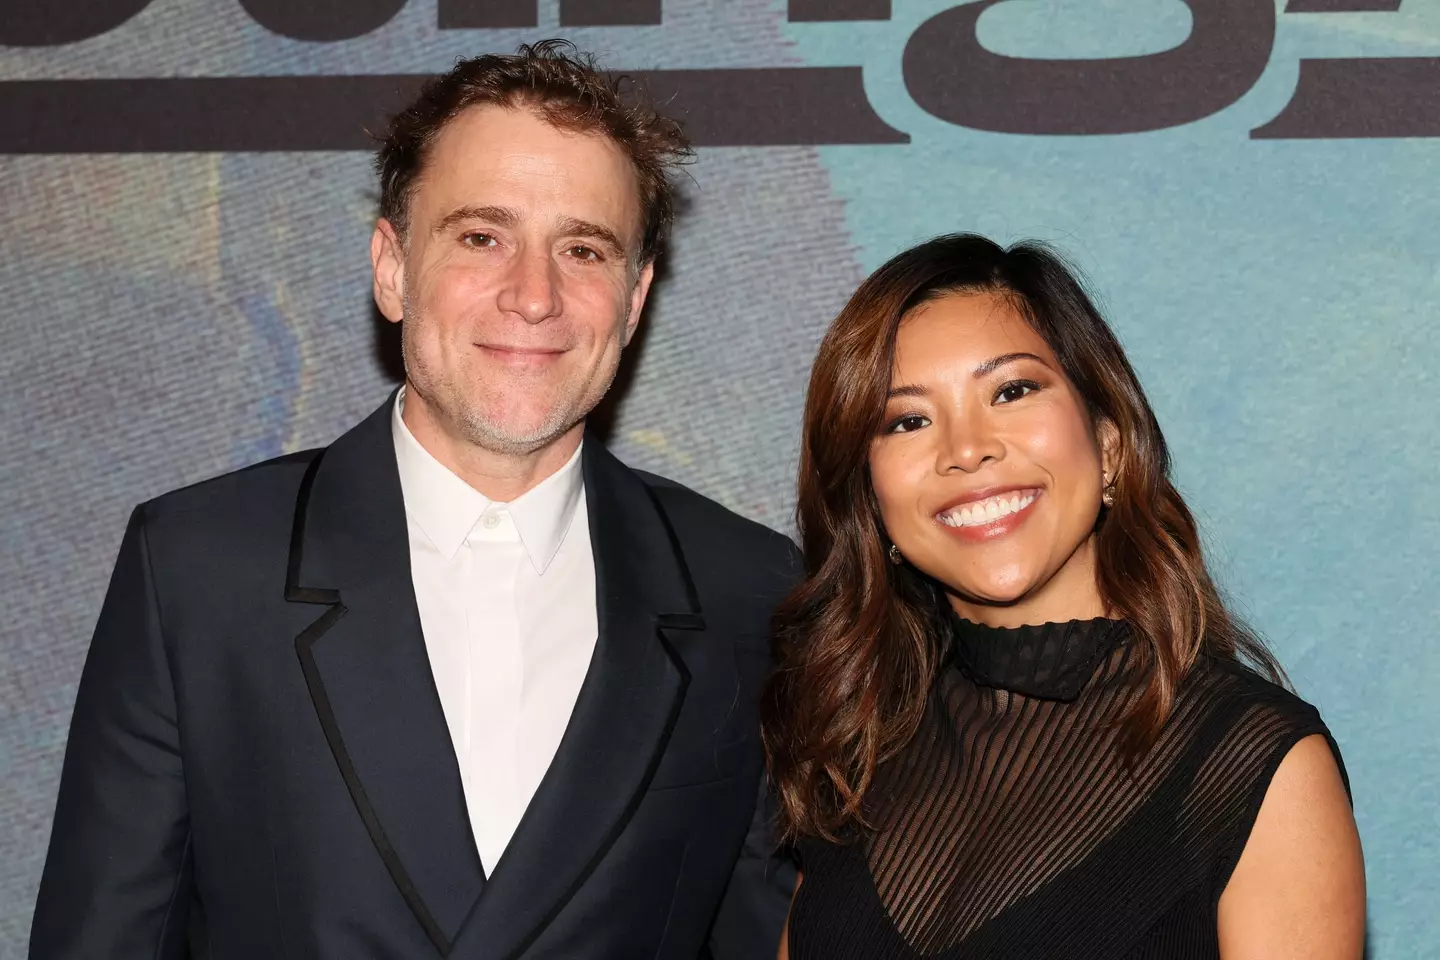 Stewart Butterfield and Jen Rubio. (Dia Dipasupil/Getty Images)